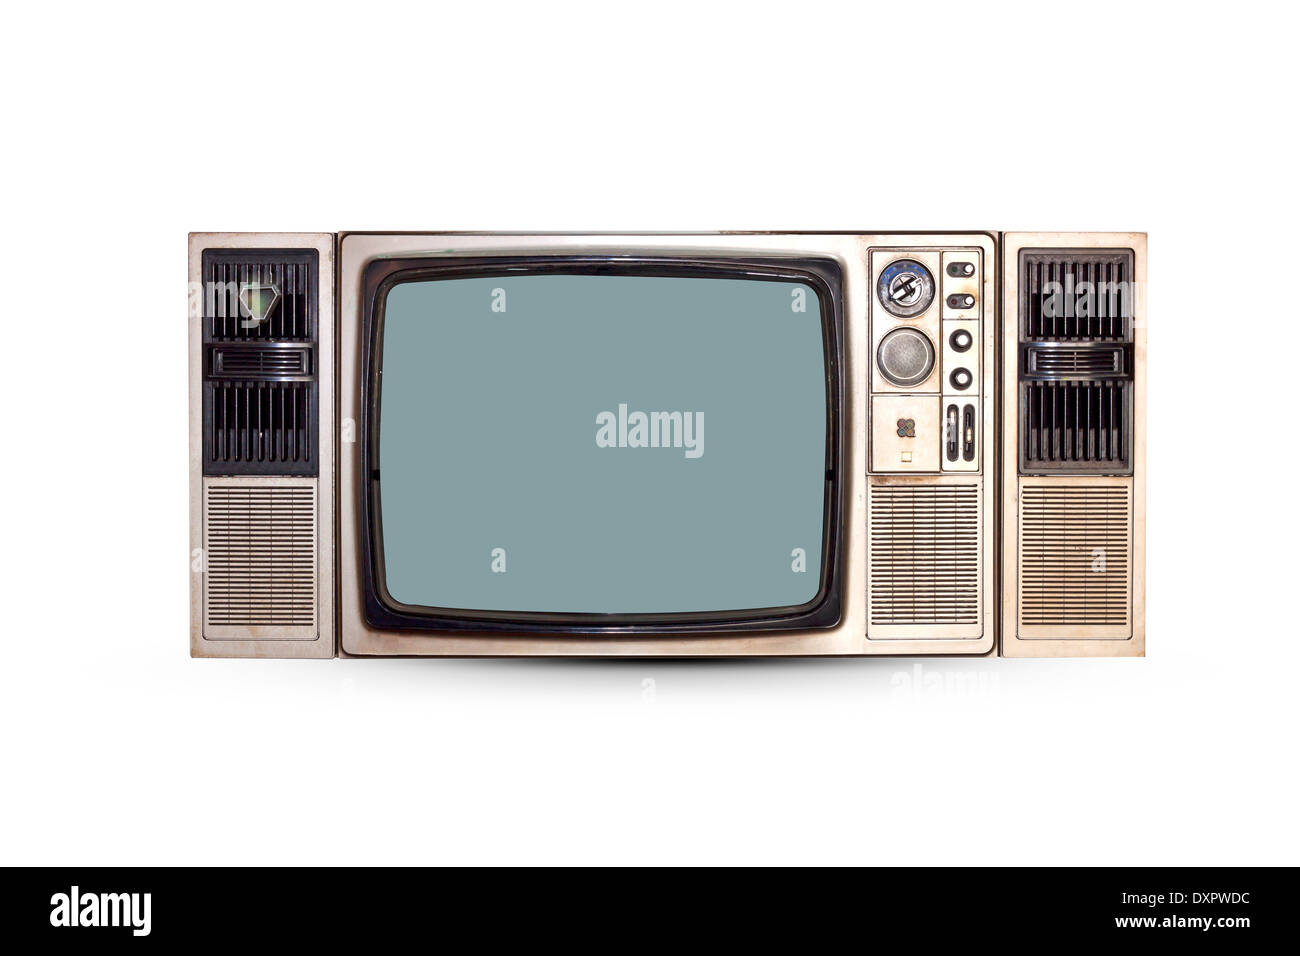 Vintage TV set isolated. Clipping path included. Stock Photo